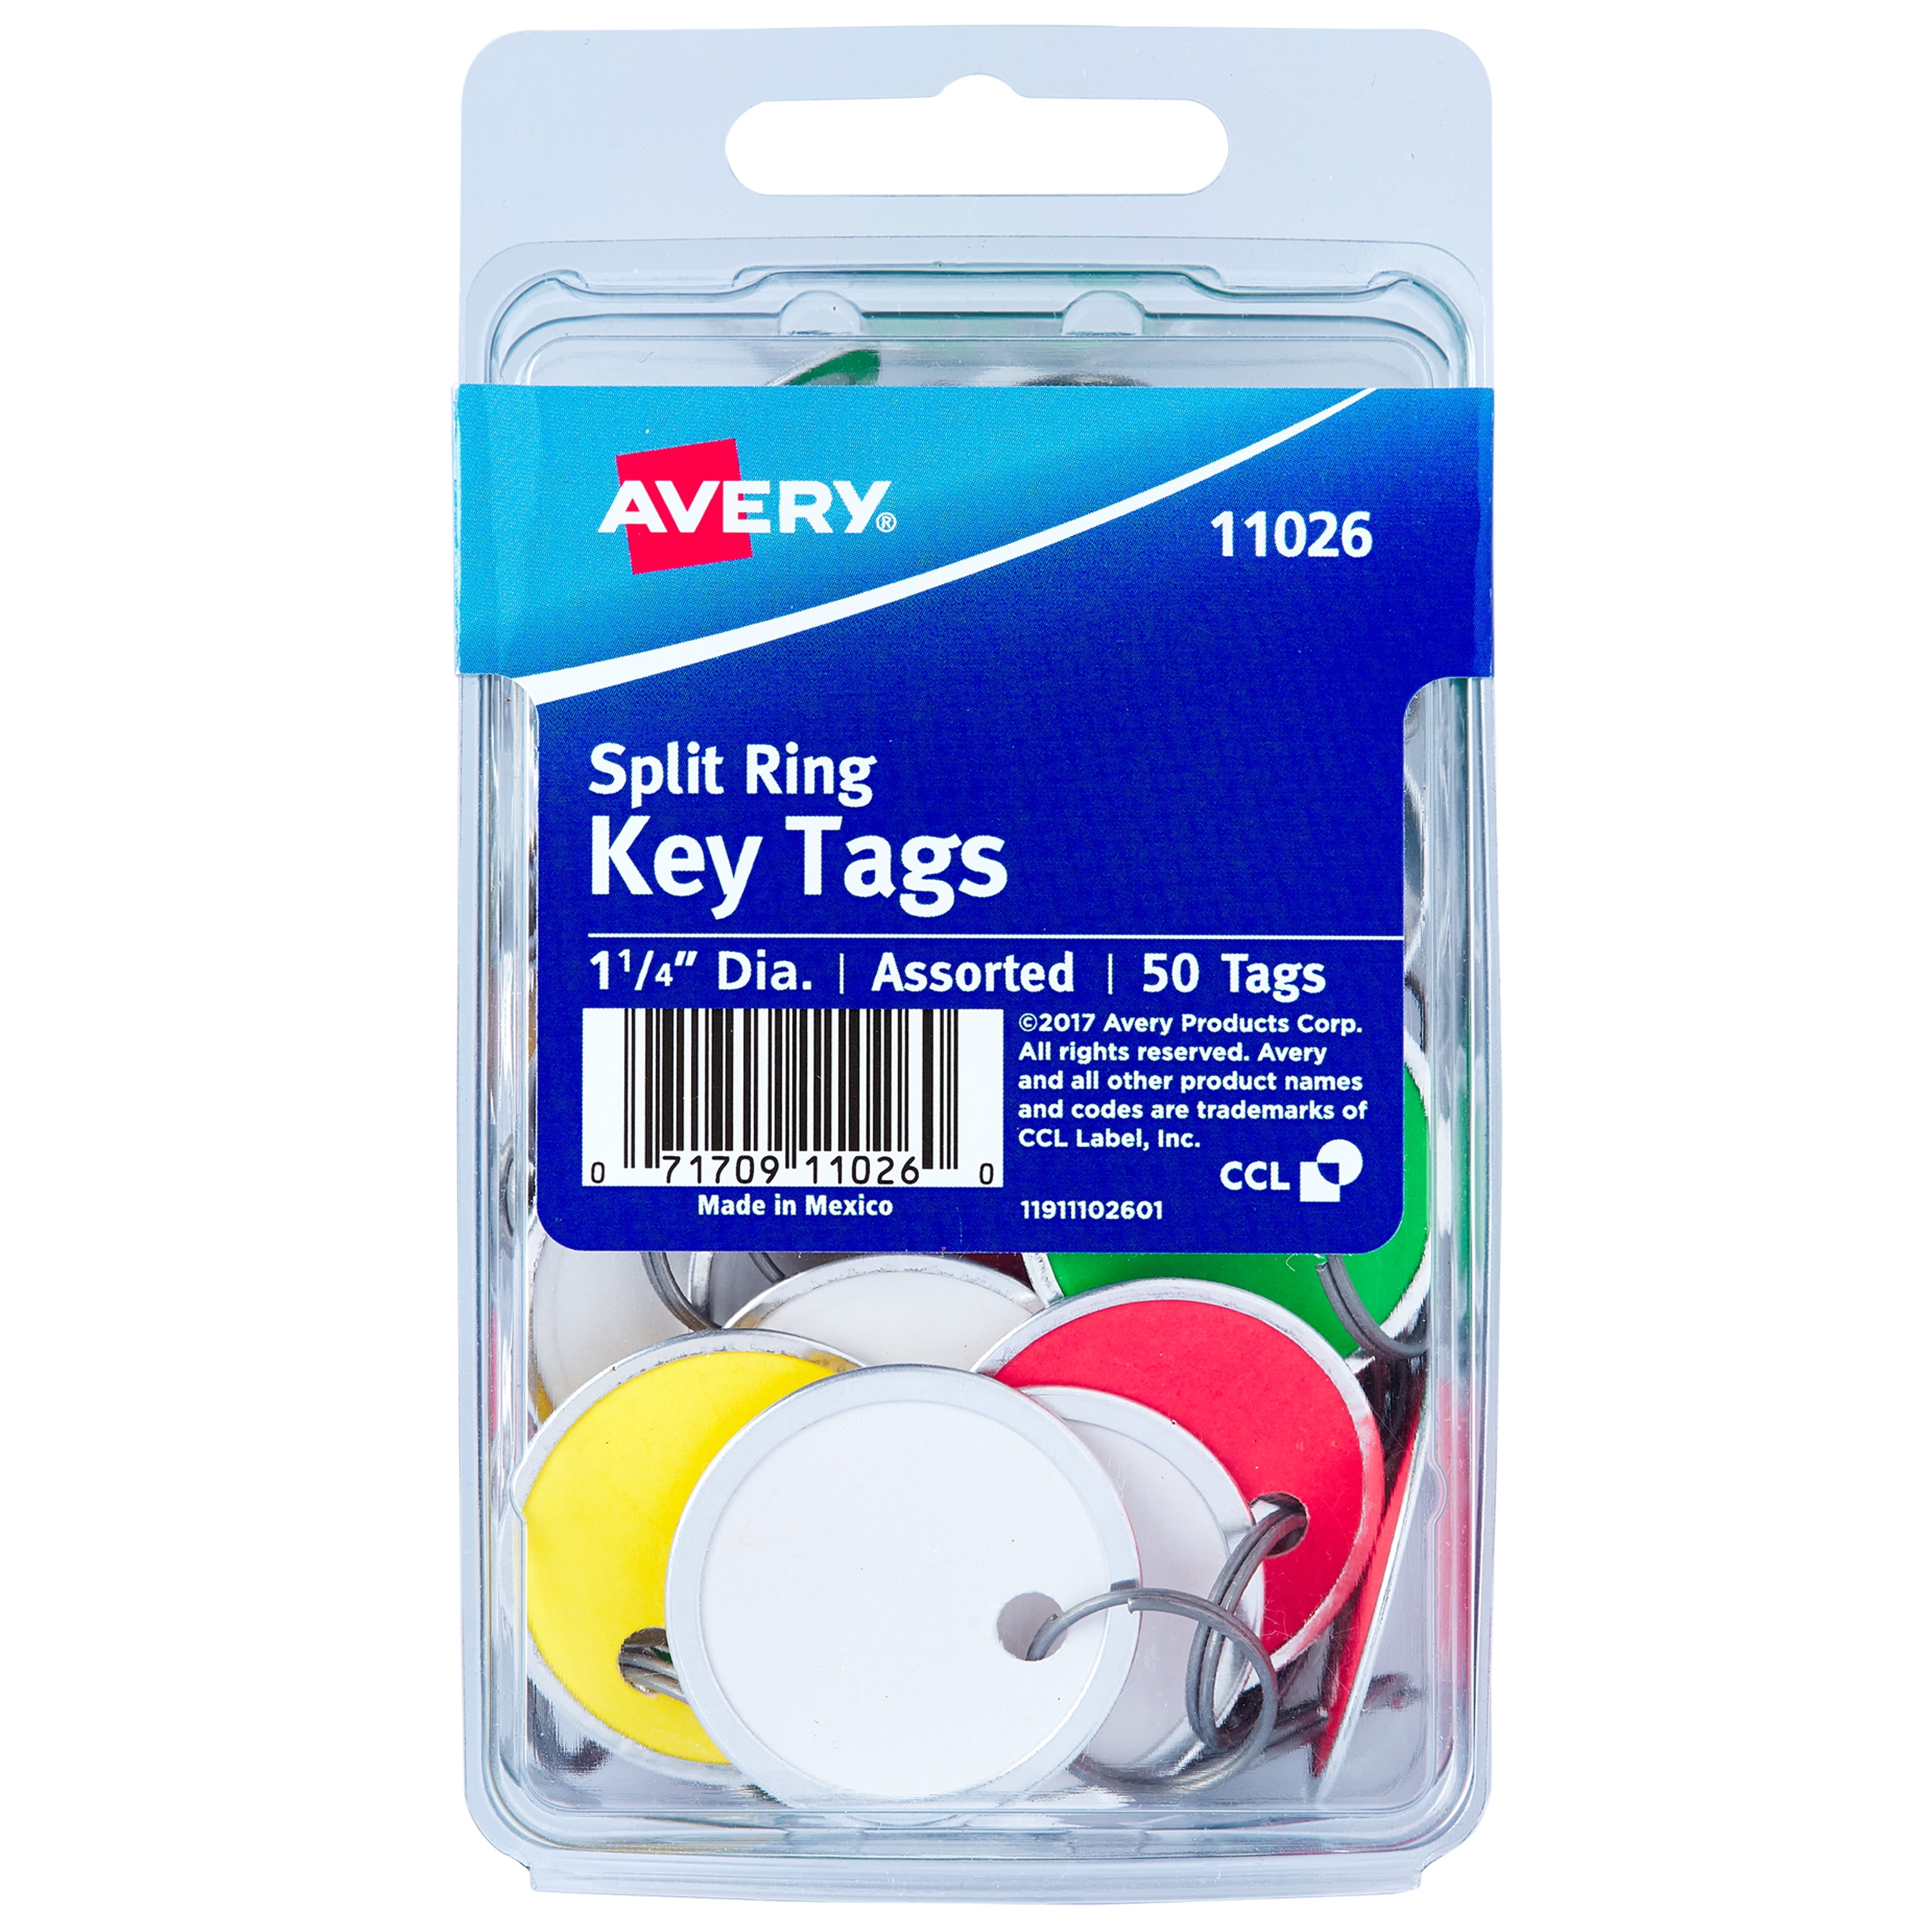 PACK OF 50 Plastic Colour Key Tags with Paper Inserts Split Rings Mixed Assorted 